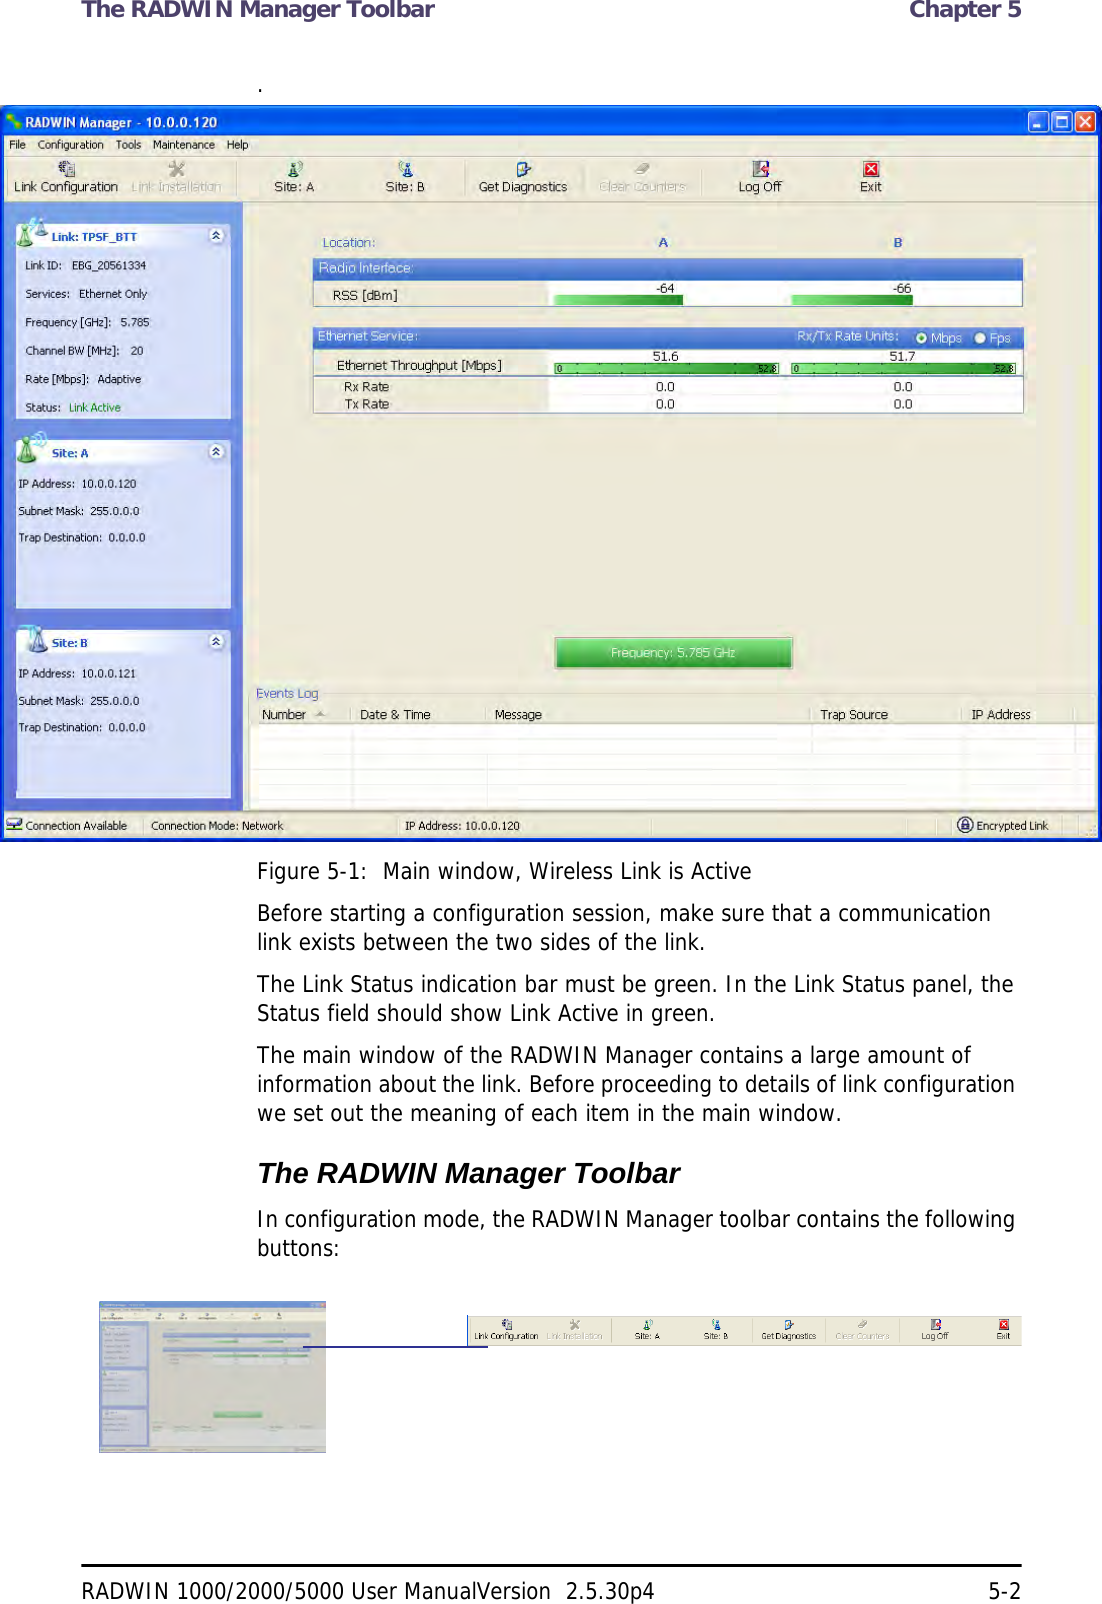 The RADWIN Manager Toolbar  Chapter 5RADWIN 1000/2000/5000 User ManualVersion  2.5.30p4 5-2.Figure 5-1:  Main window, Wireless Link is ActiveBefore starting a configuration session, make sure that a communication link exists between the two sides of the link.The Link Status indication bar must be green. In the Link Status panel, the Status field should show Link Active in green.The main window of the RADWIN Manager contains a large amount of information about the link. Before proceeding to details of link configuration we set out the meaning of each item in the main window.The RADWIN Manager ToolbarIn configuration mode, the RADWIN Manager toolbar contains the following buttons: